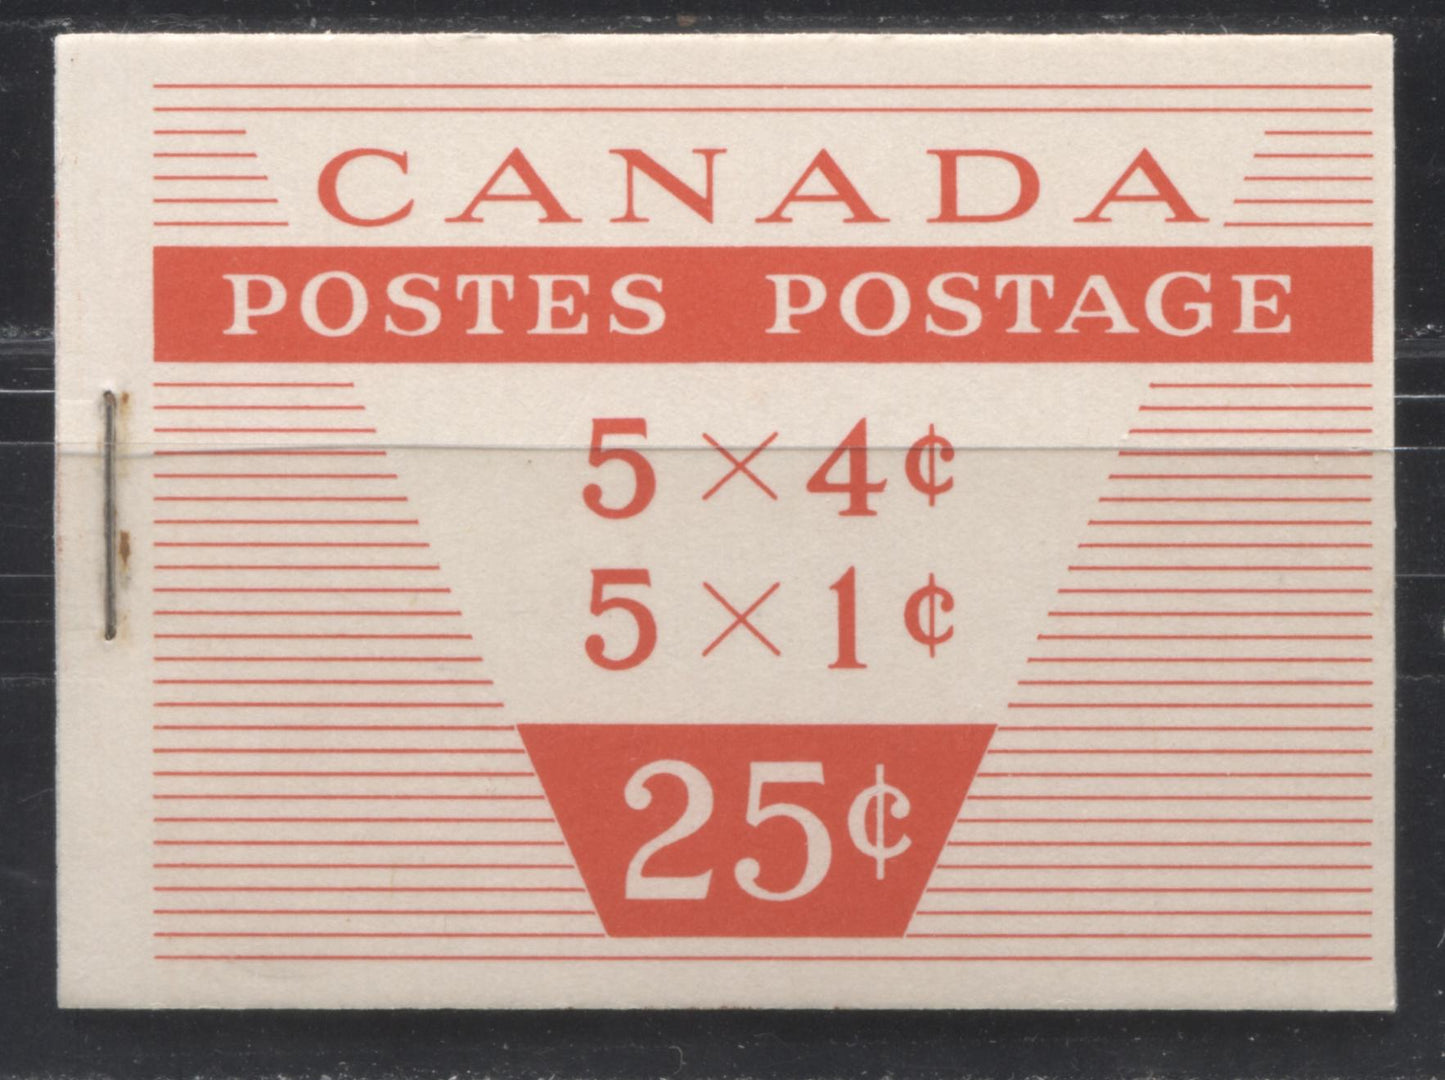 Canada McCann #BK53c (Unitrade #BK53c) 1962-1967 Cameo Issue, a VFNH Booklet Containing 1c & 4c Panes of 5 + Label, Type III Cover, DF Grayish Cream Front Cover With Fluorescent Red Ink, DF Panes, LF and MF Interleaving